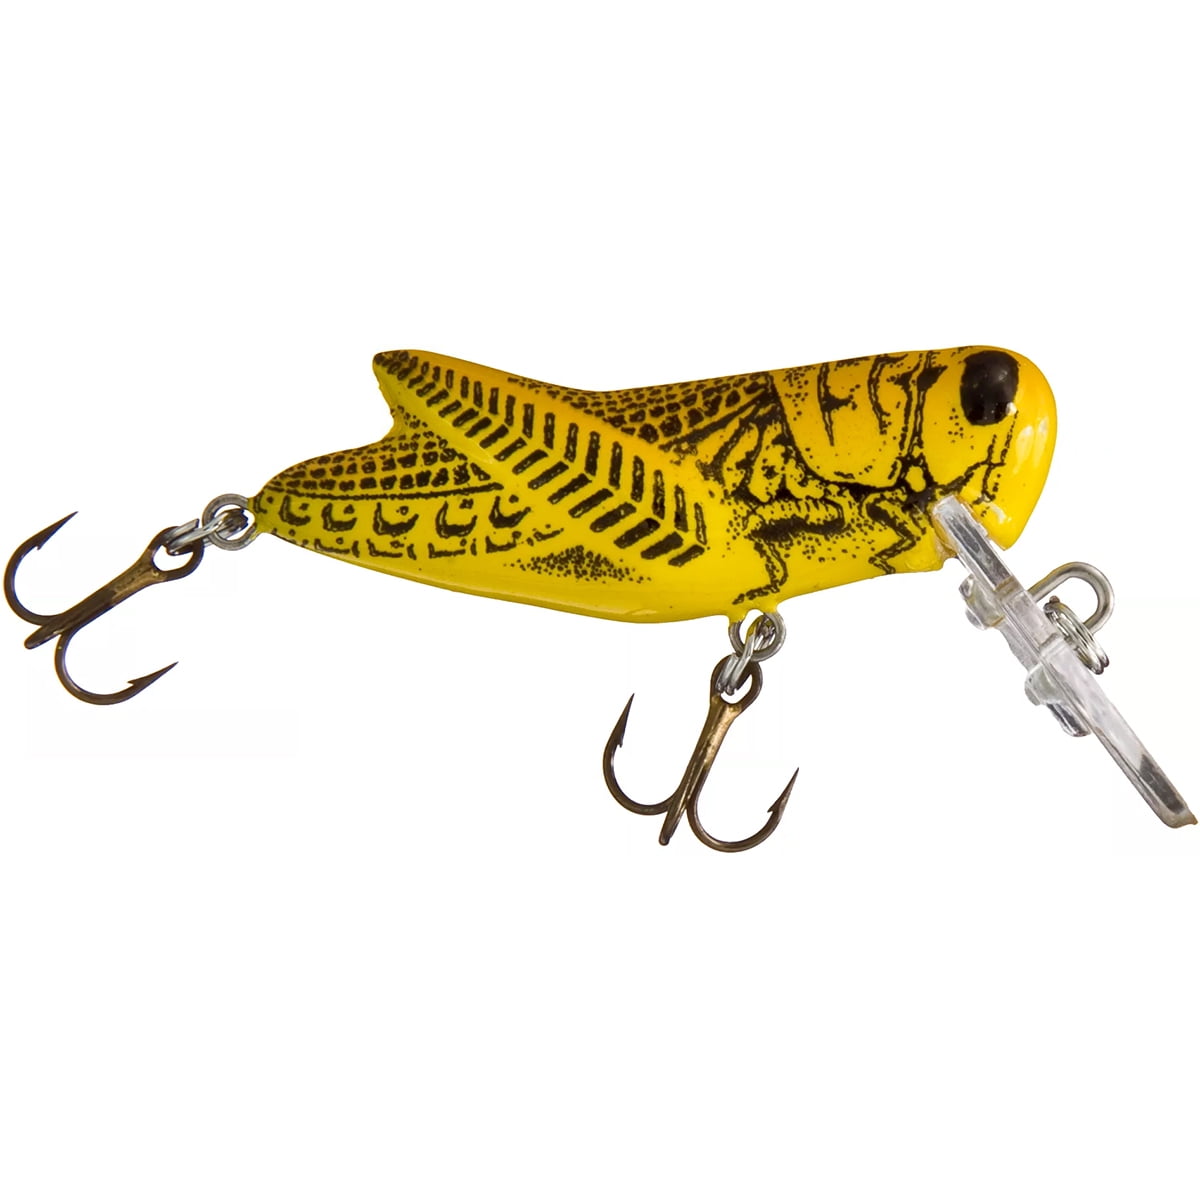 Jenzi Insect Wobbler G-Hope Grasshopper - Lures imitating insects